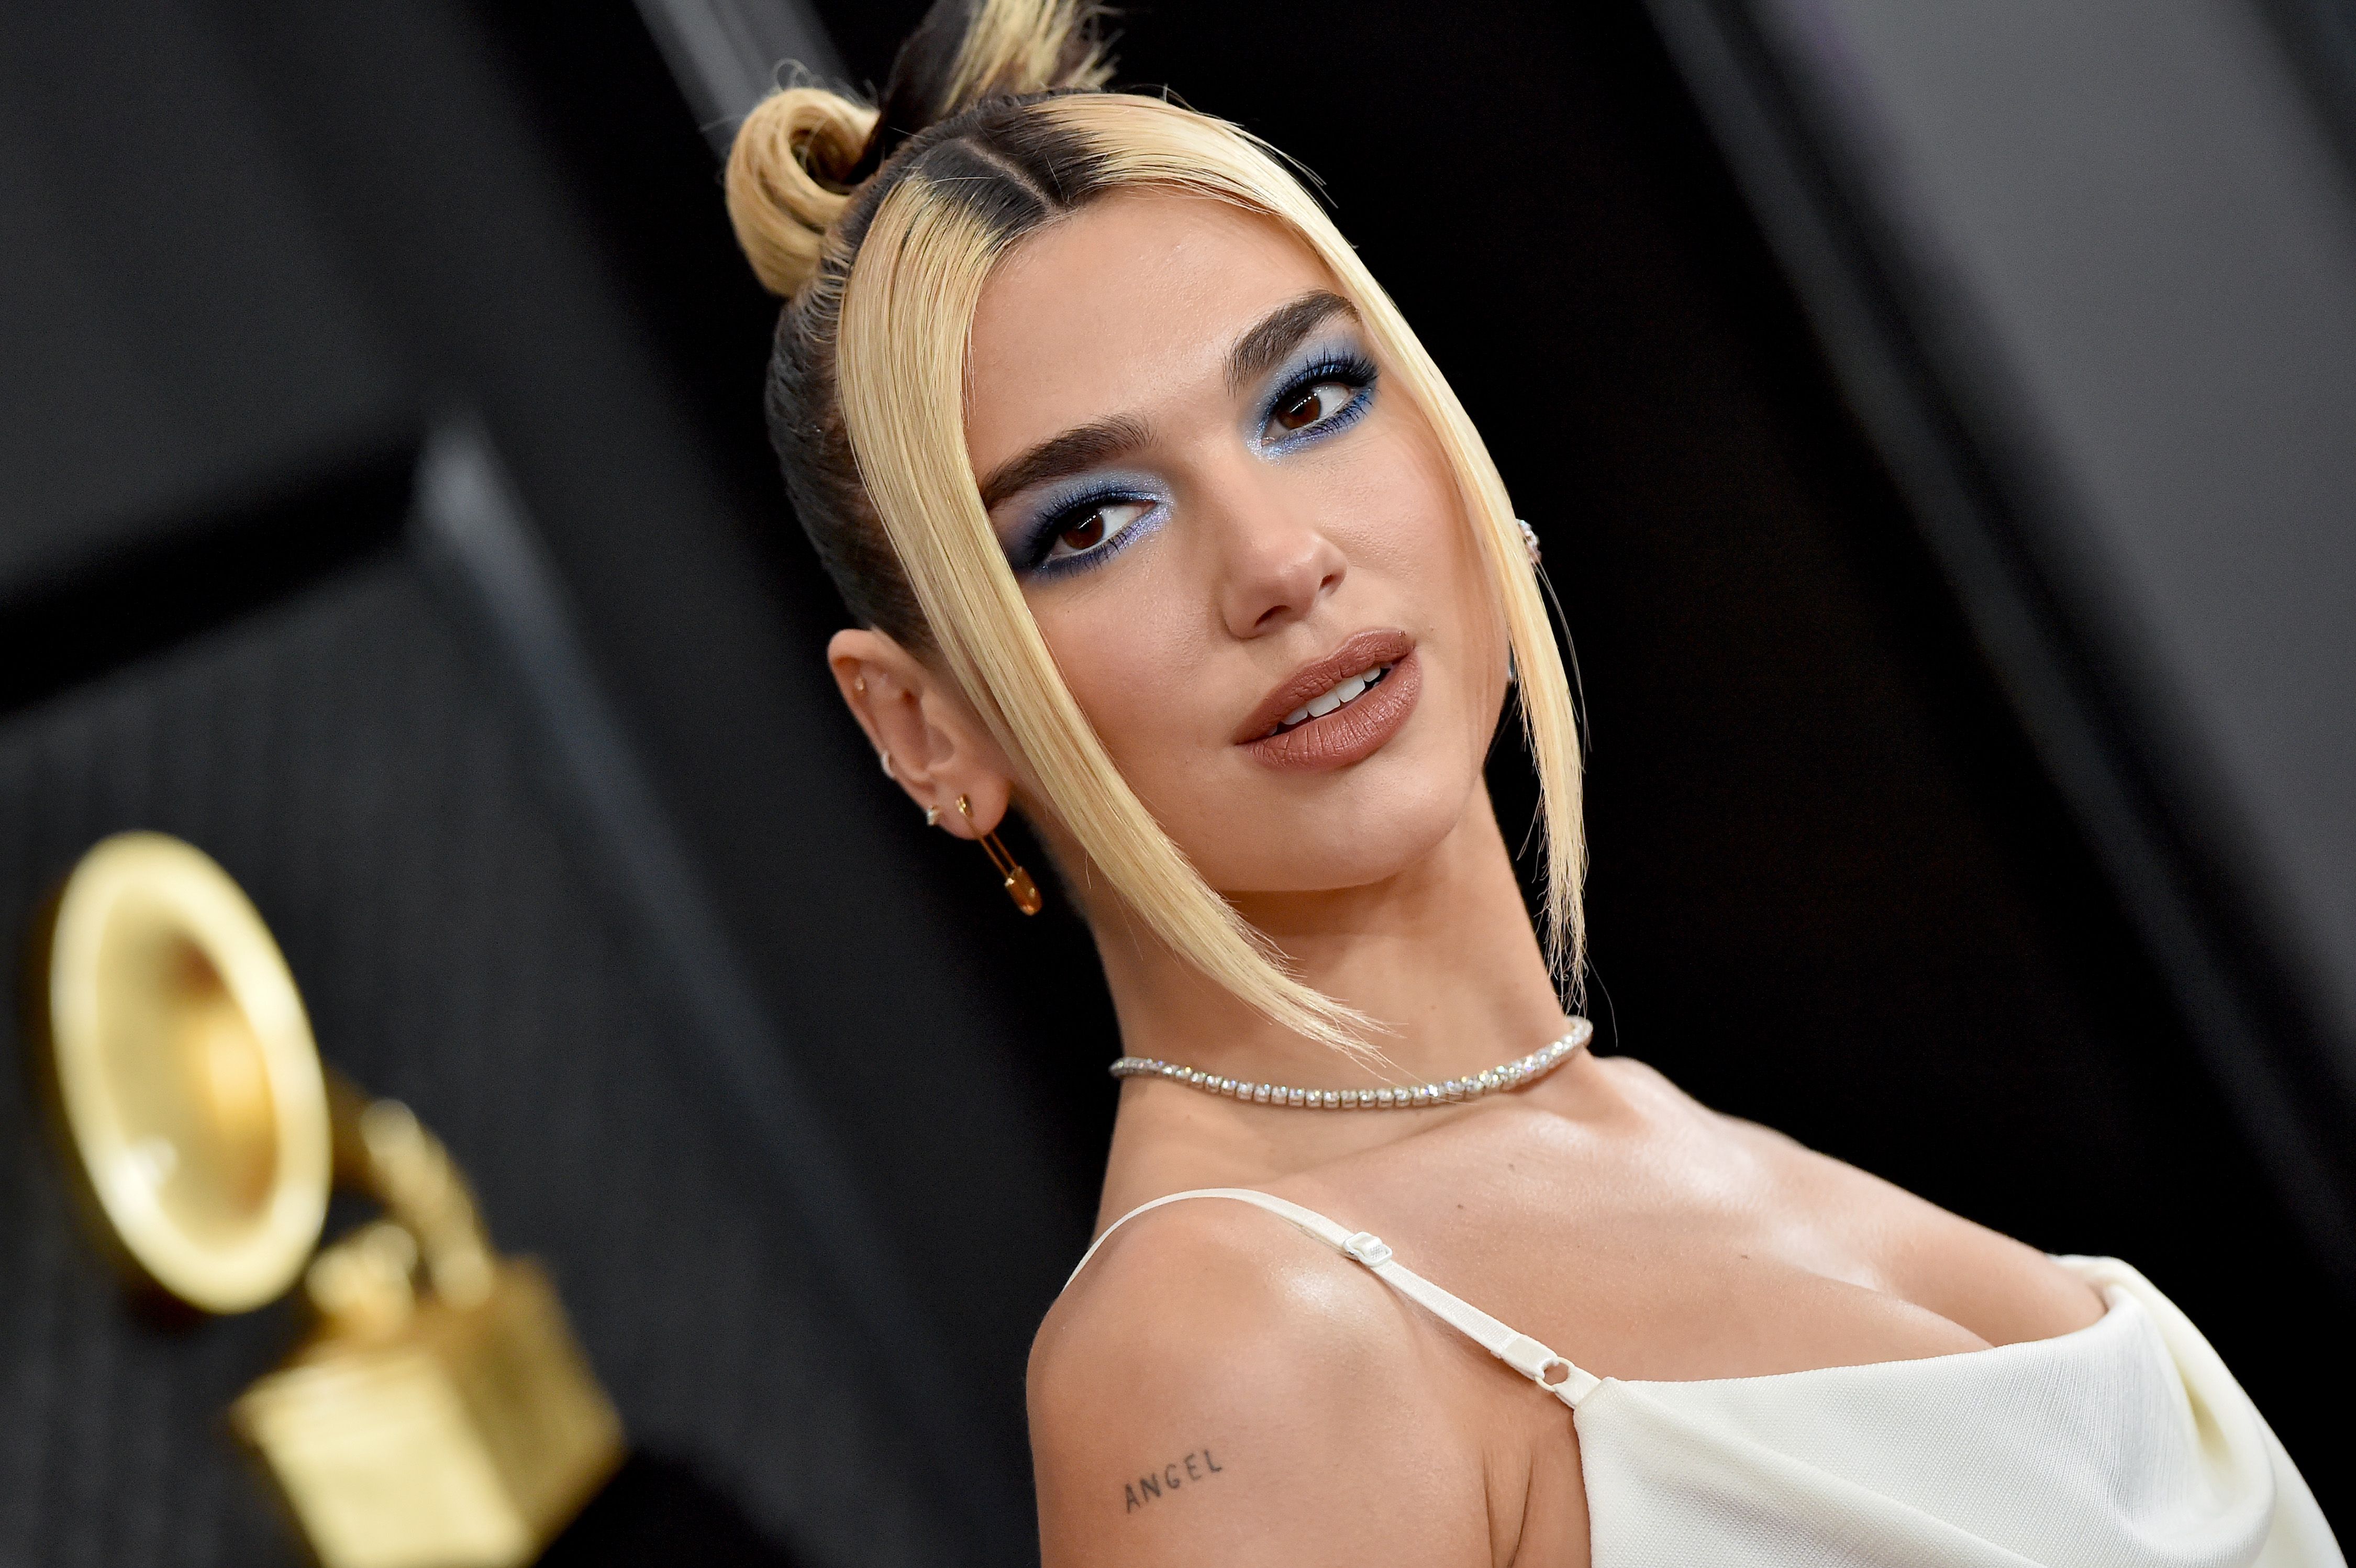 Dua Lipa Receives Support From Fans Following Backlash For Visiting Strip Club With Lizzo